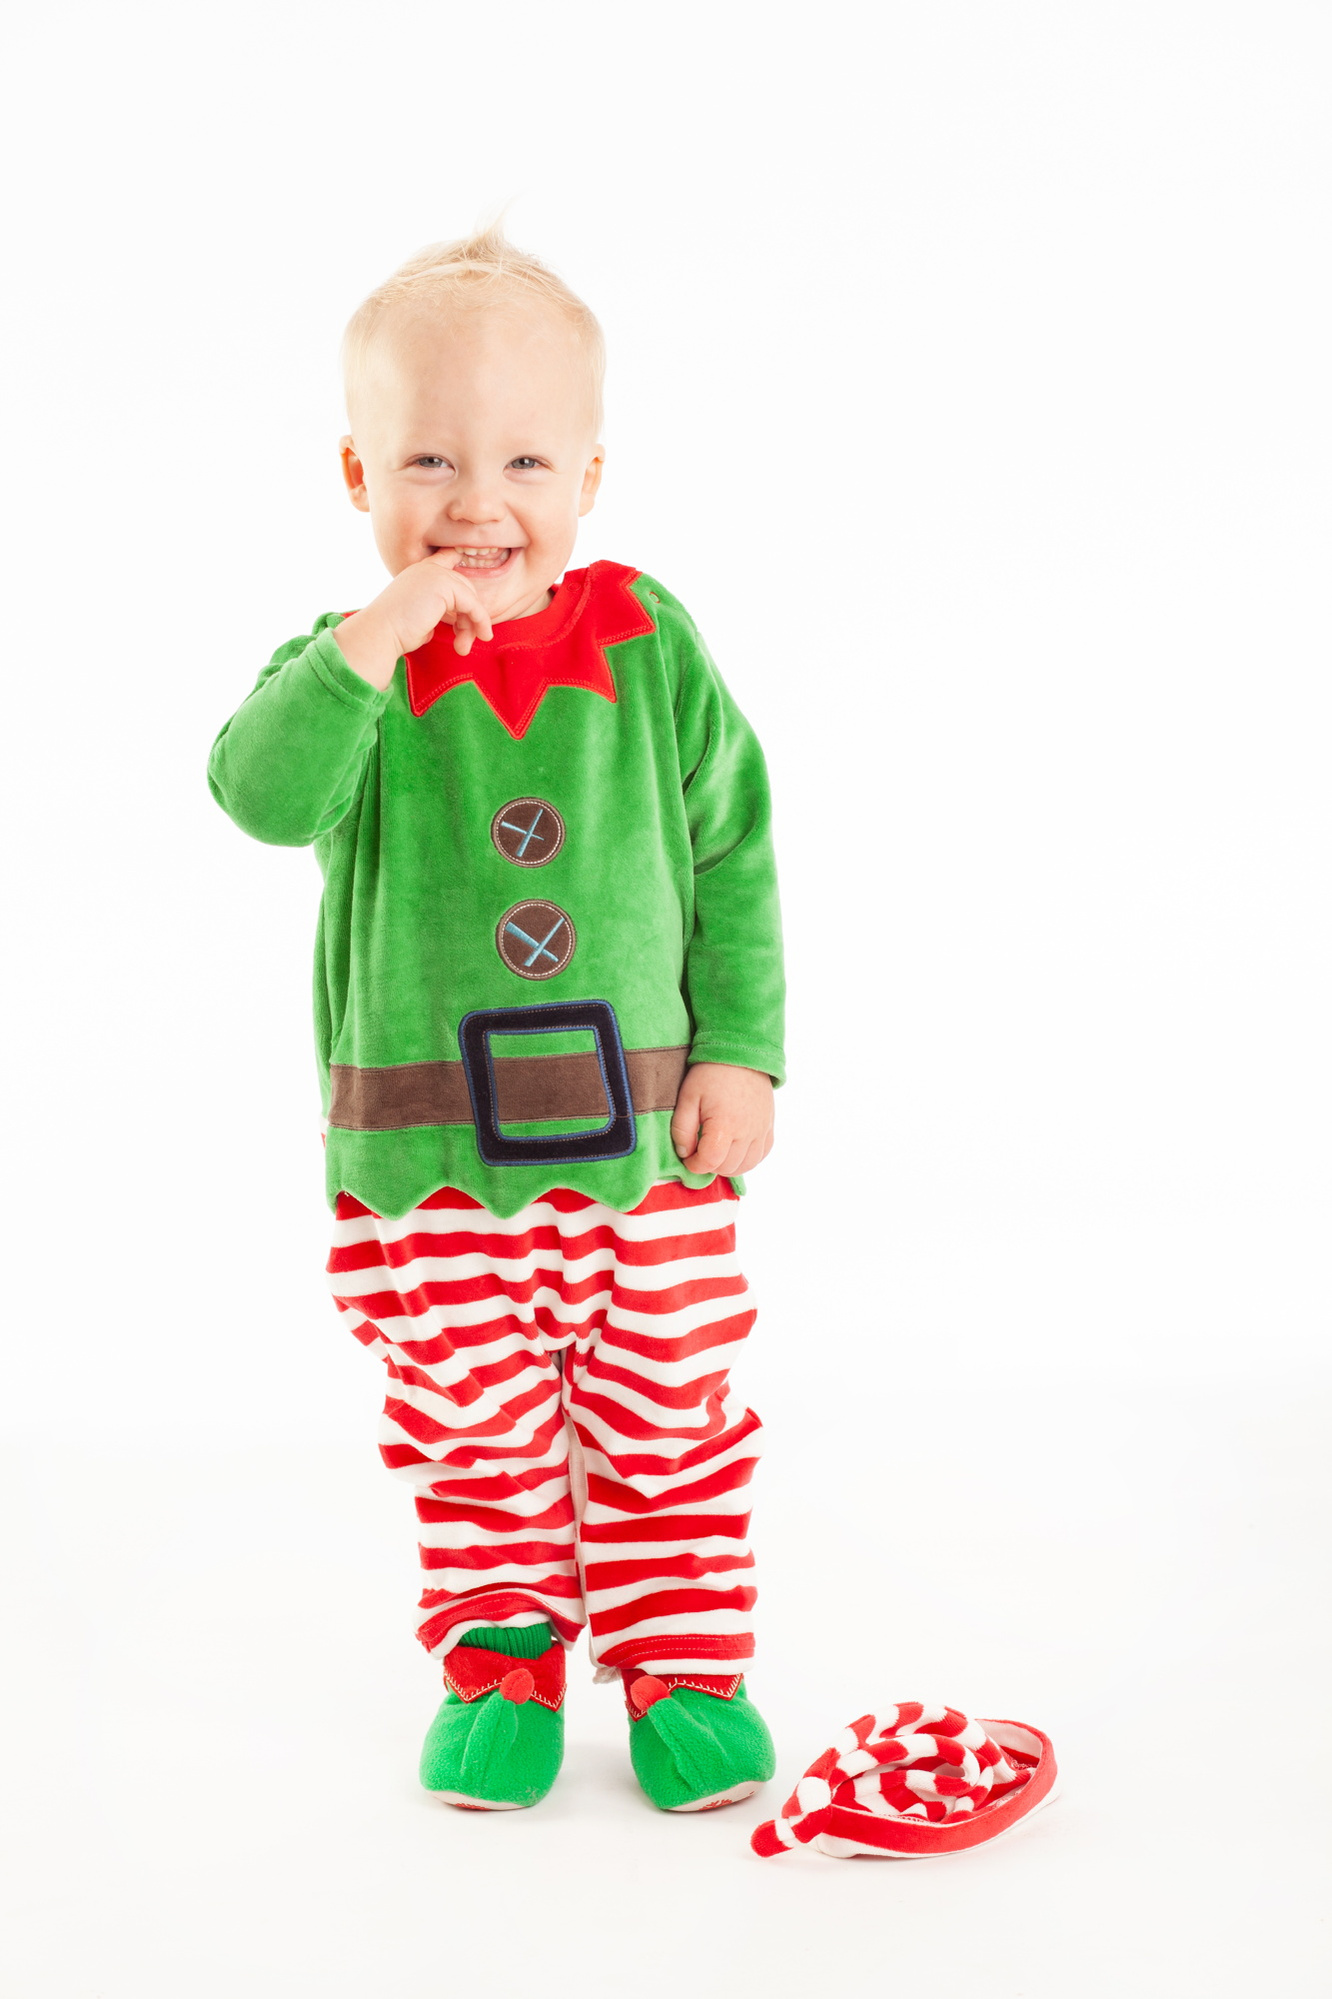 Christmas portrait of a little boy in elf costume in a professional family portrait photography studio with white background